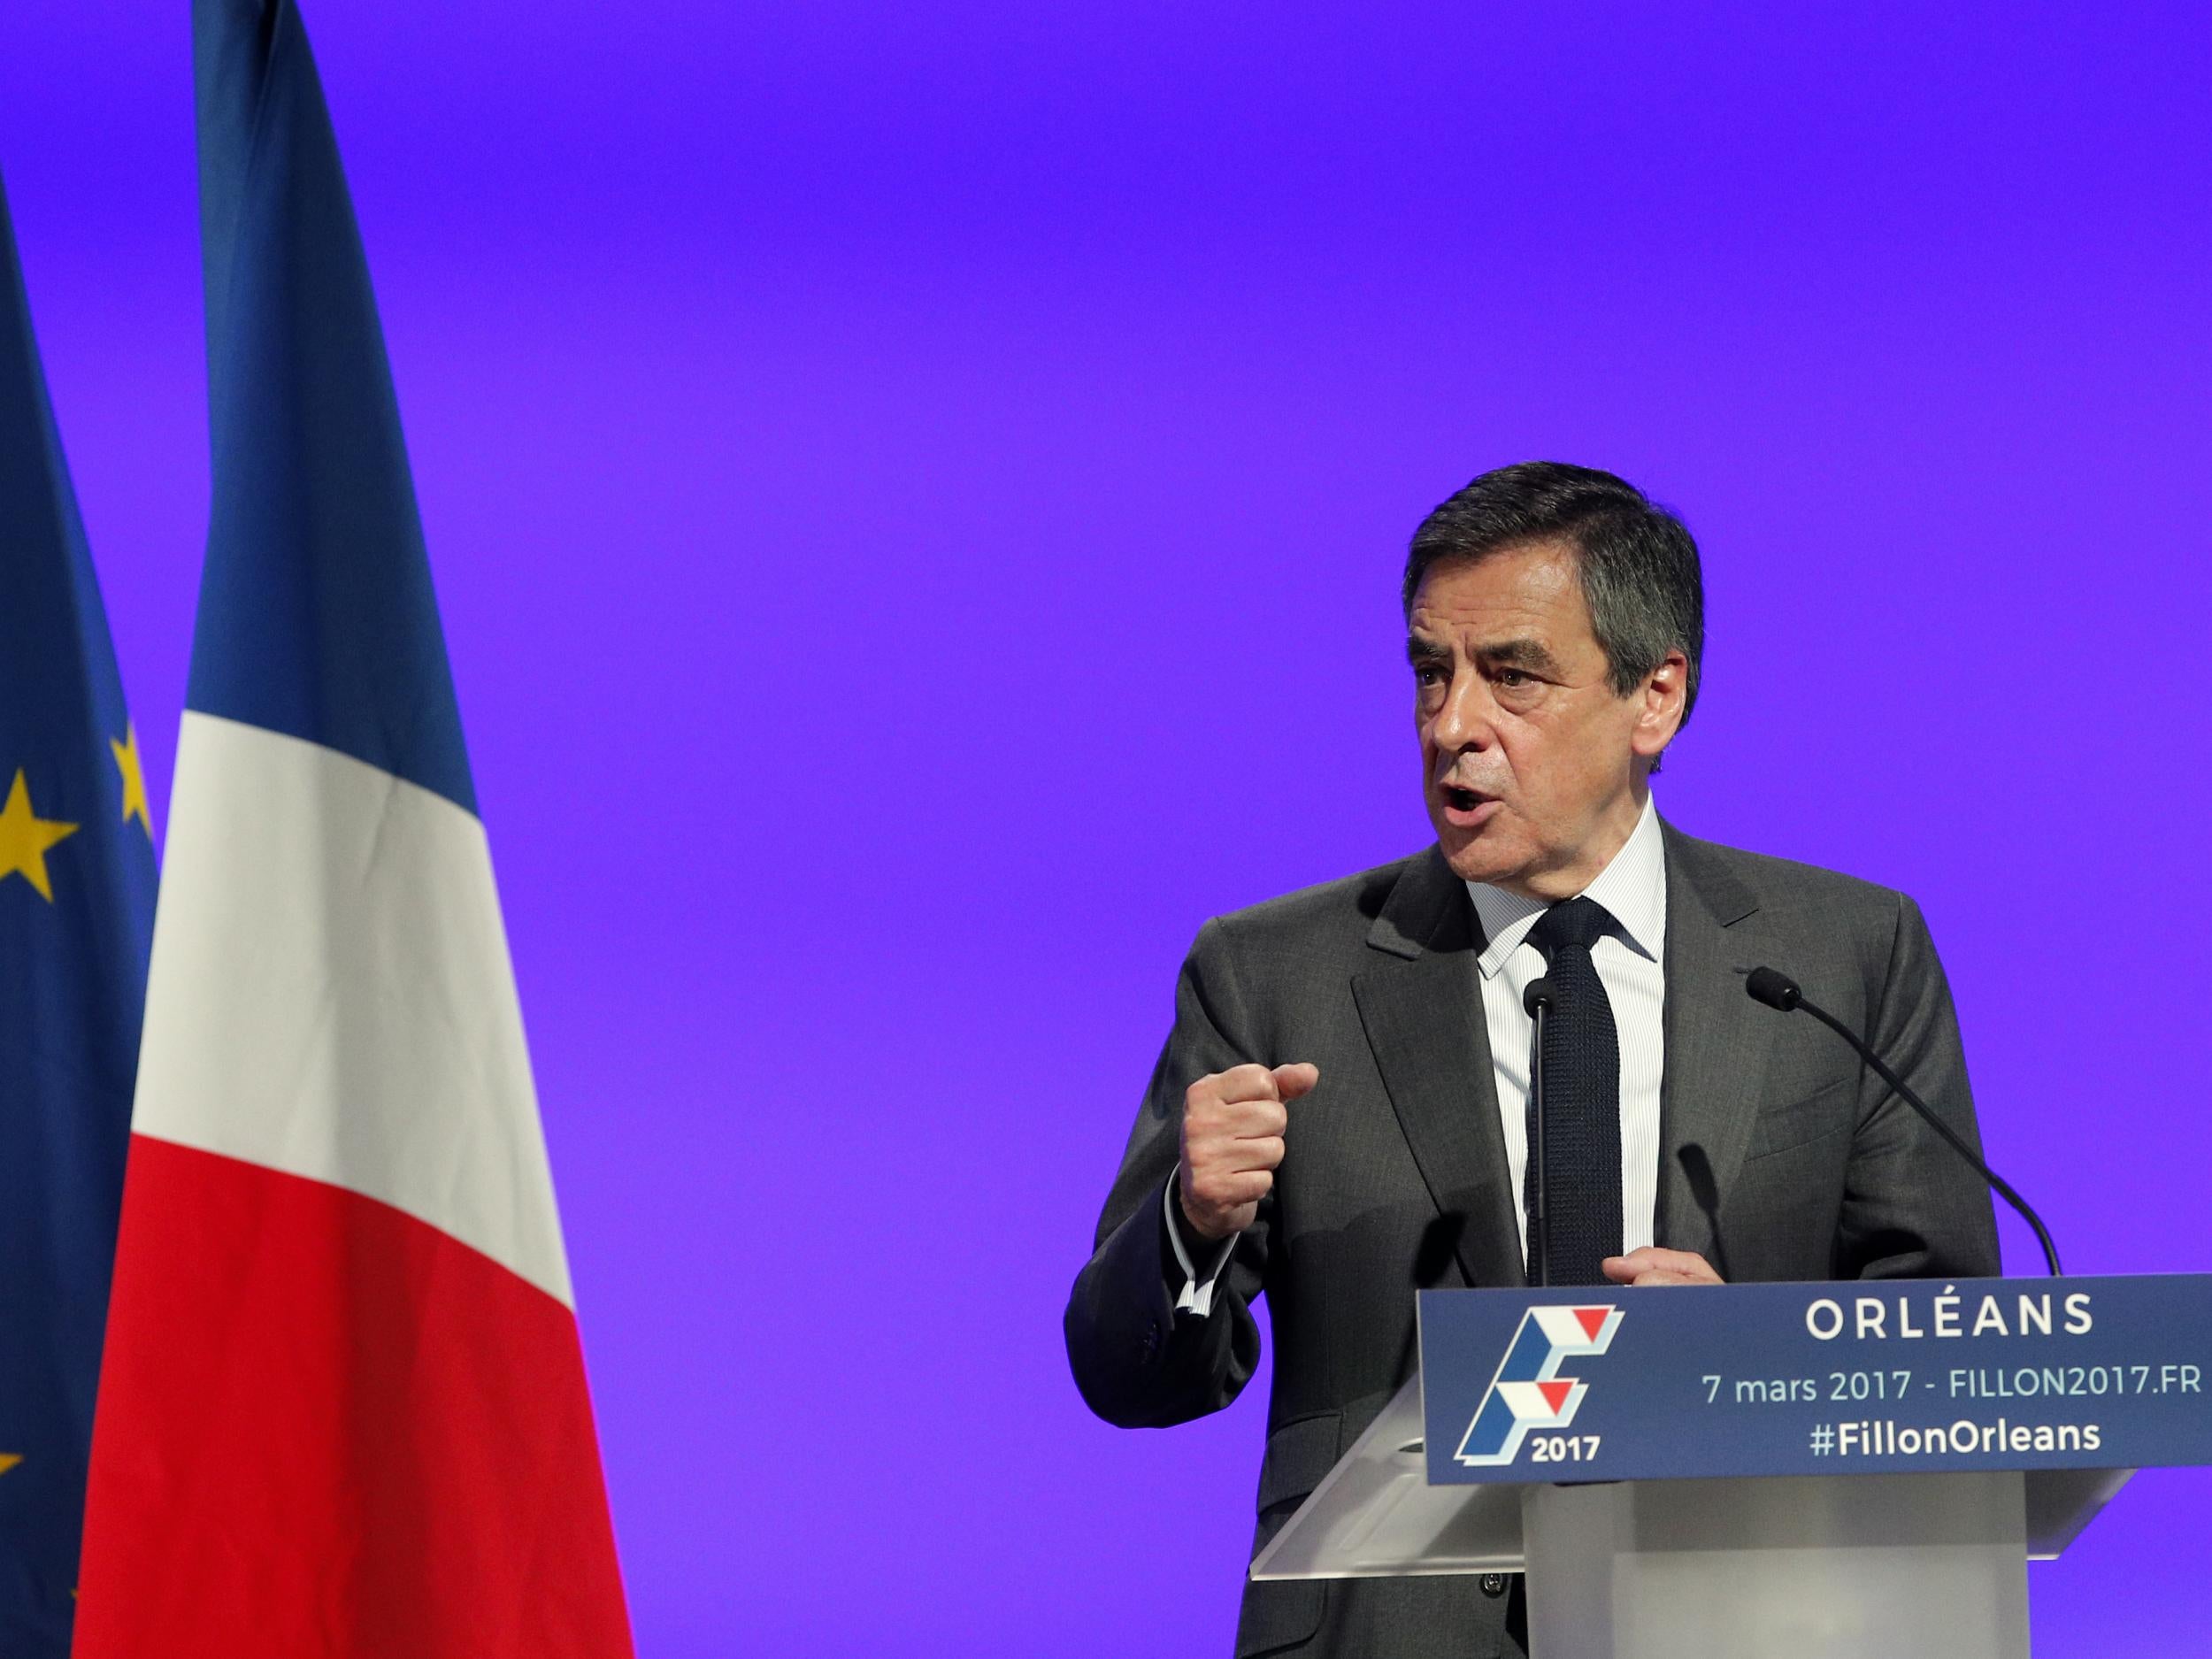 François Fillon has asked centrists of the UDI party to close ranks behind him